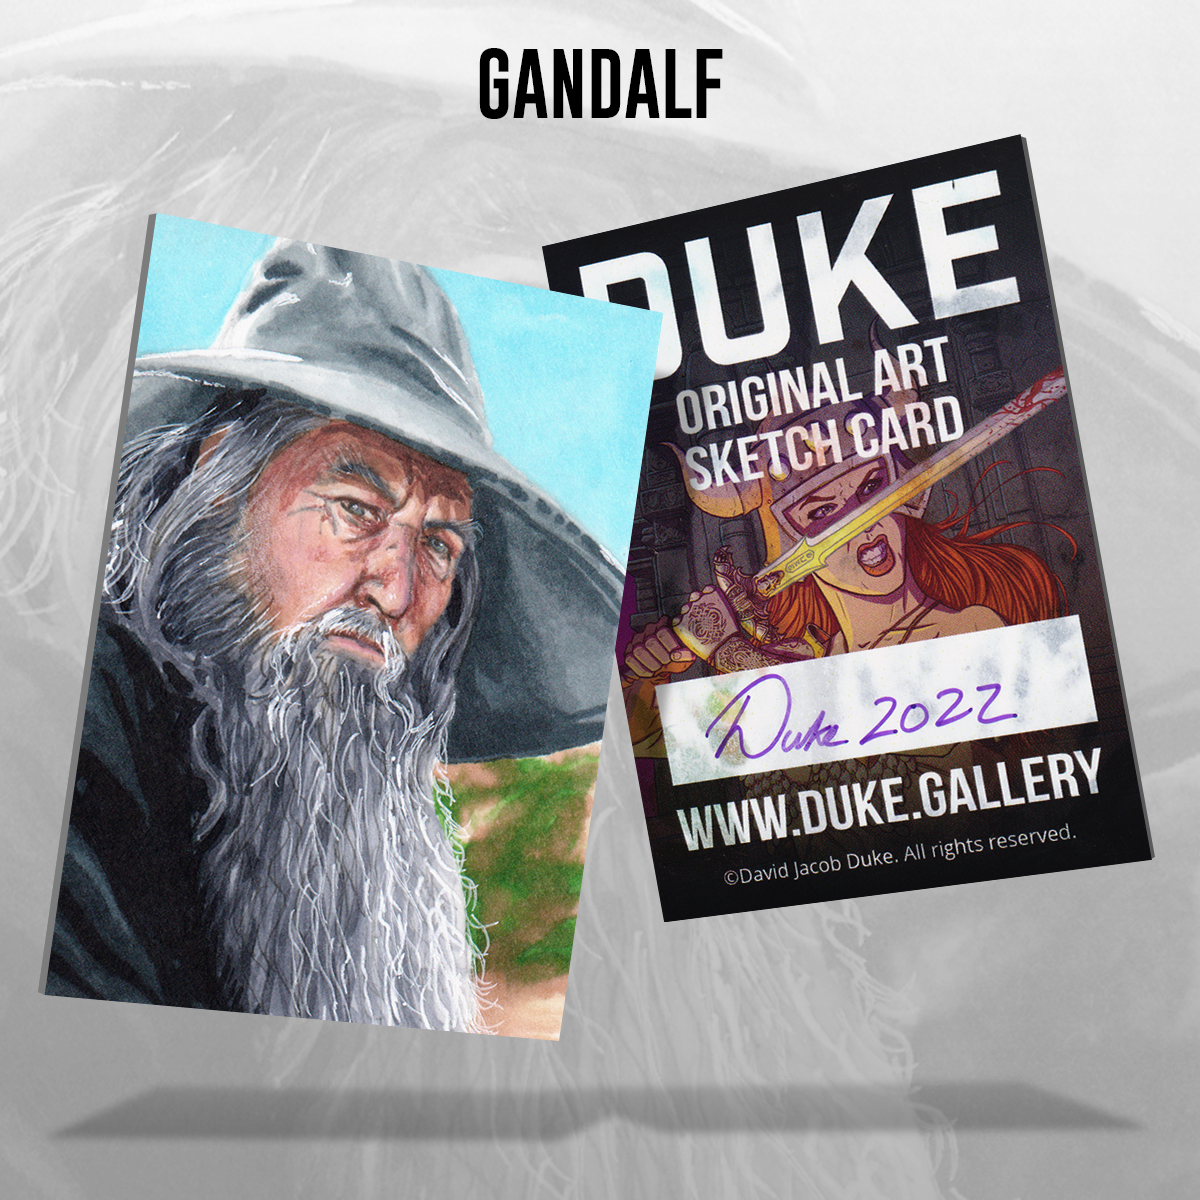 Lord of the Rings Gandalf Sketch Card by Duke